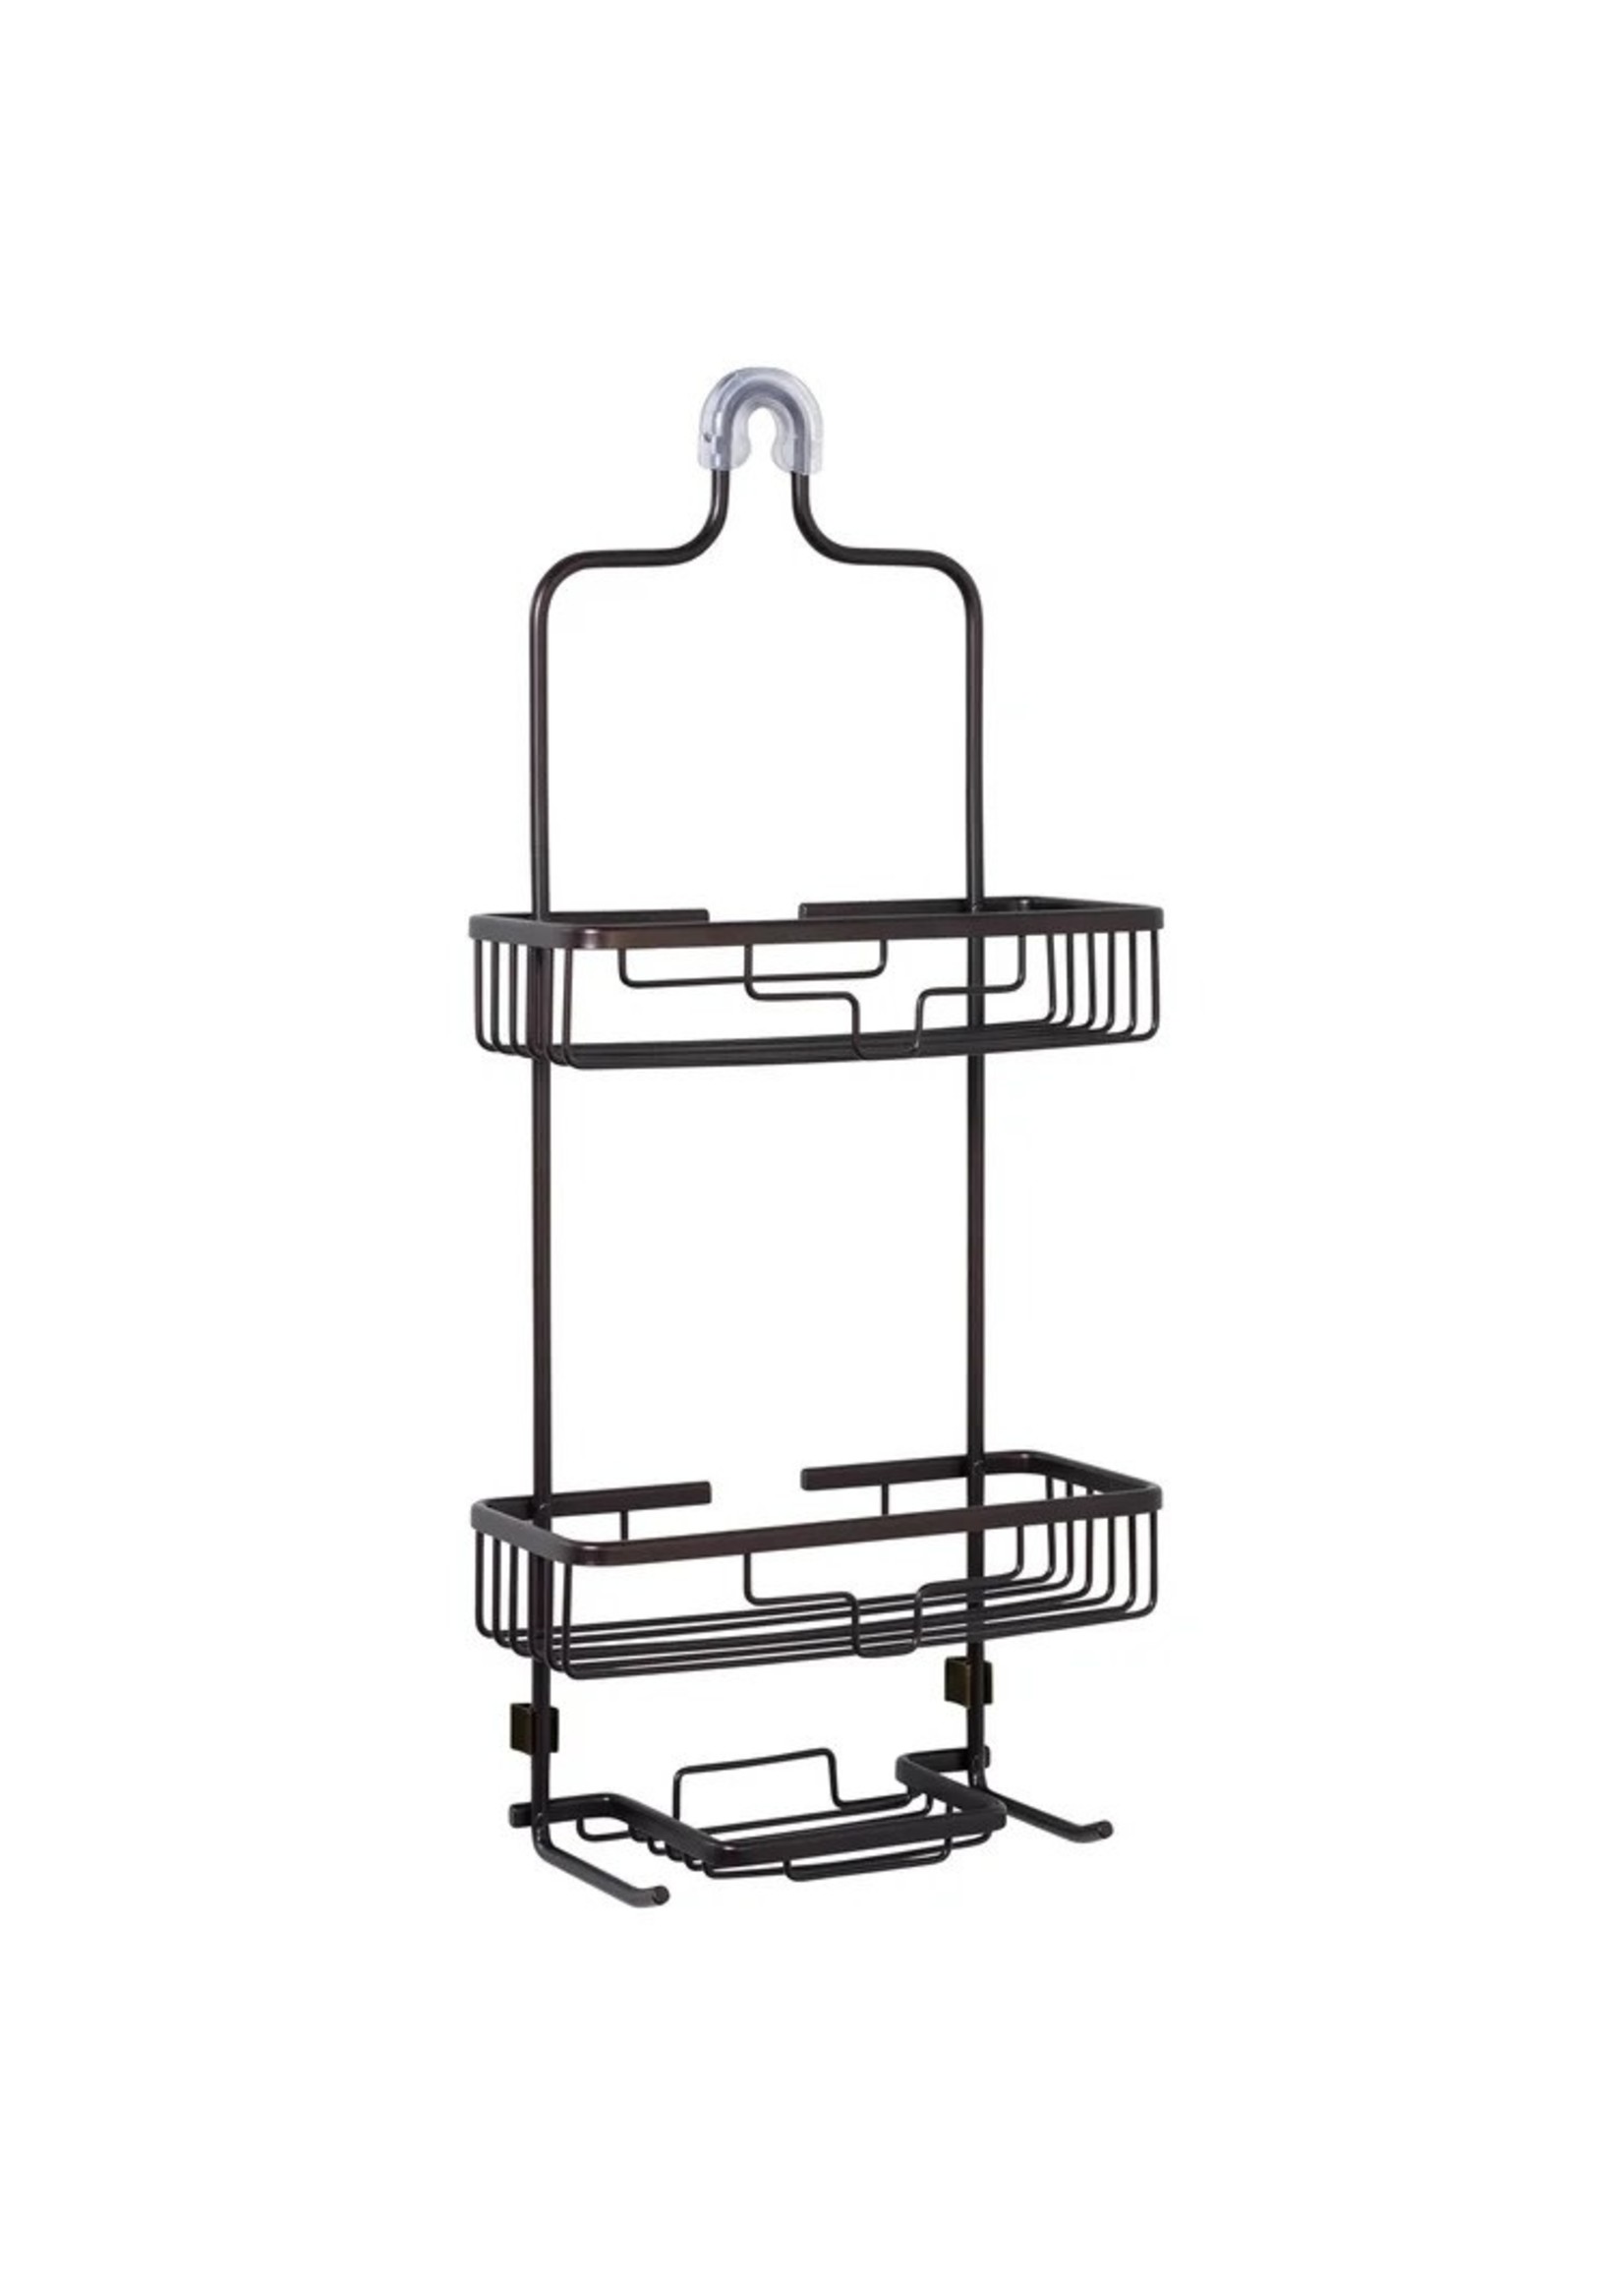 *Stier Two Shelve Aluminum Shower Caddy With Locktop